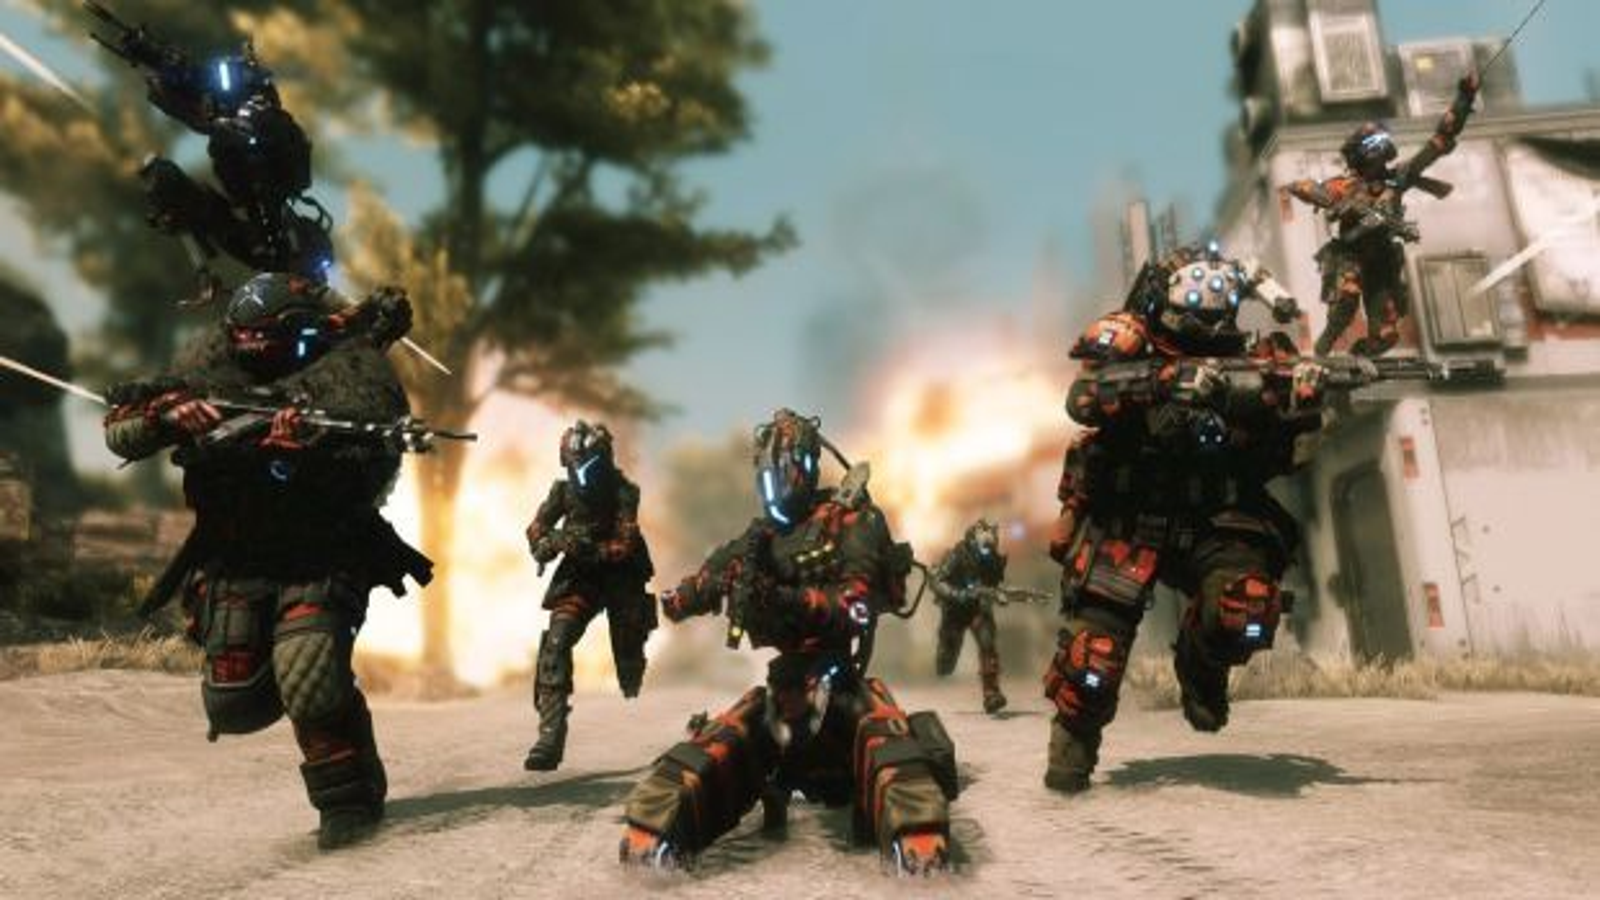 Apex Legends publisher teases Titanfall 2 sequel coming “down the